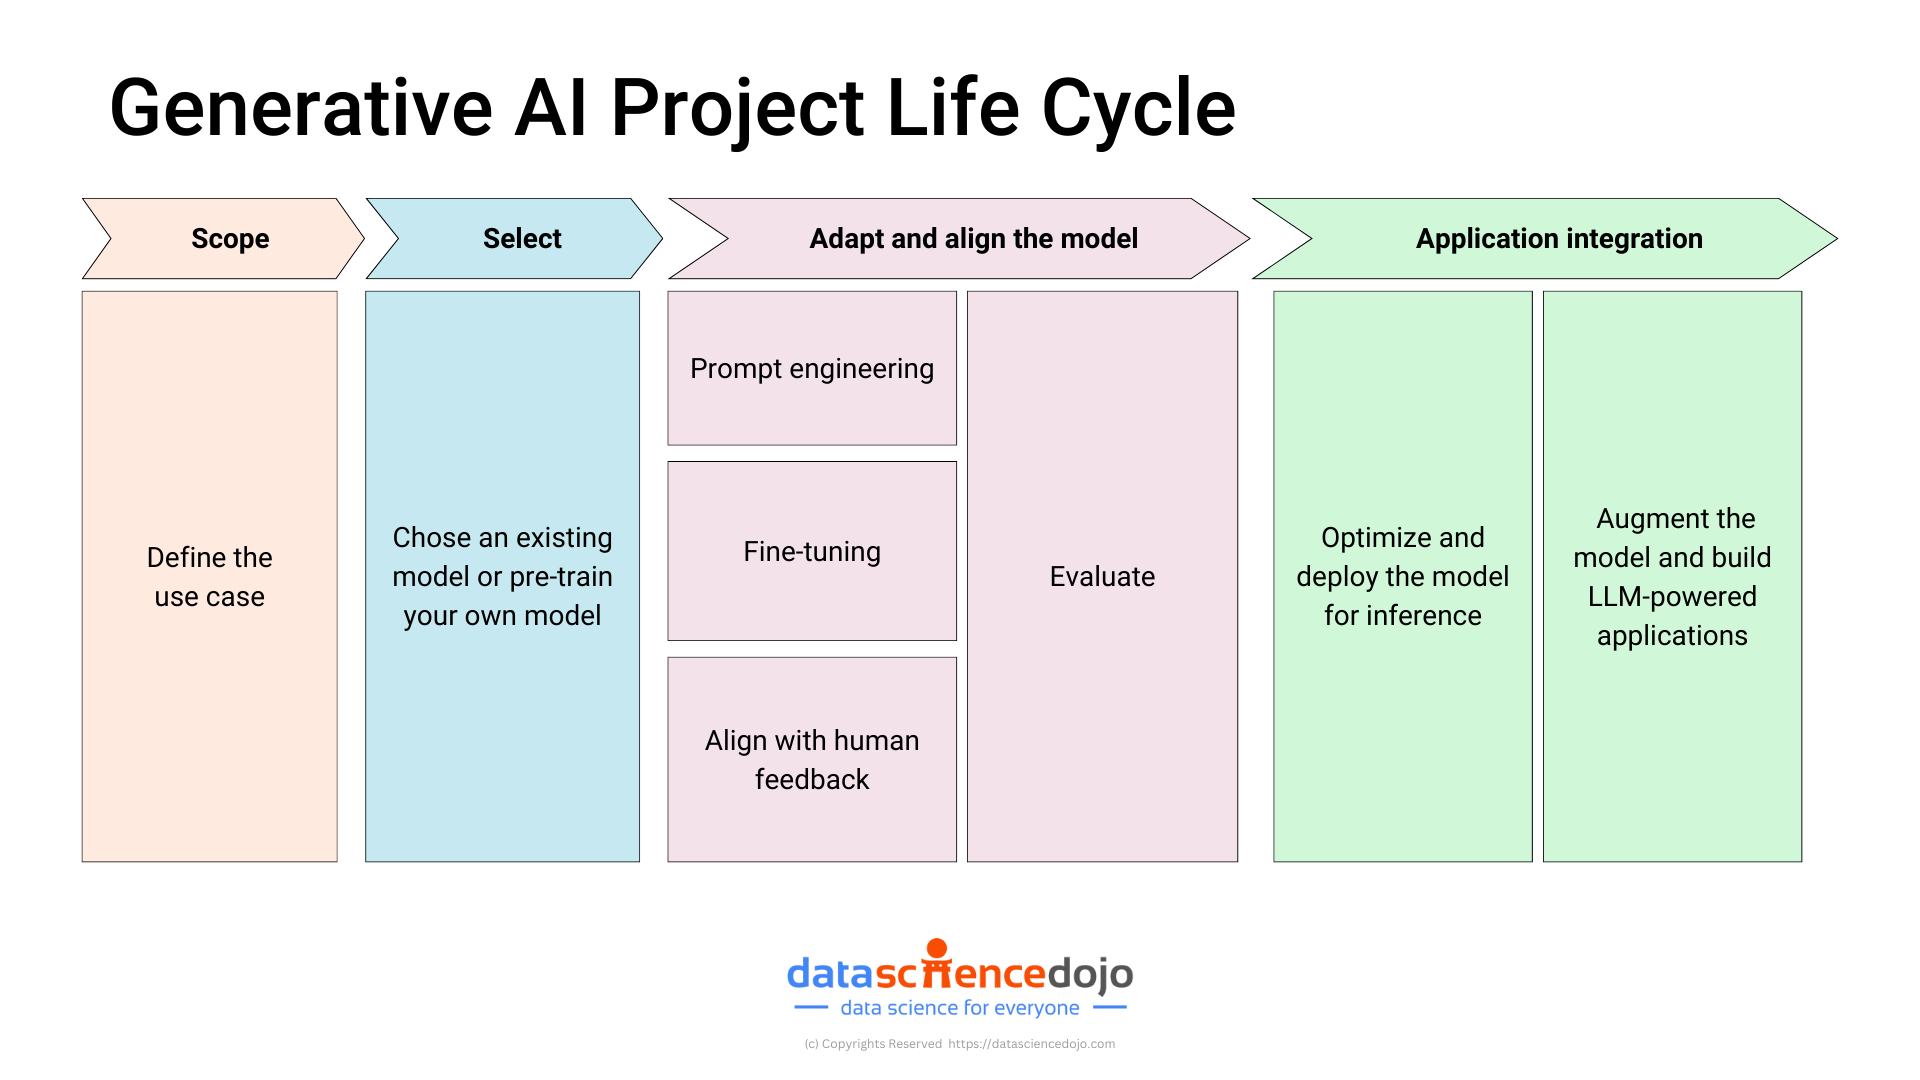 Gen AI project lifecycle - Ai project management